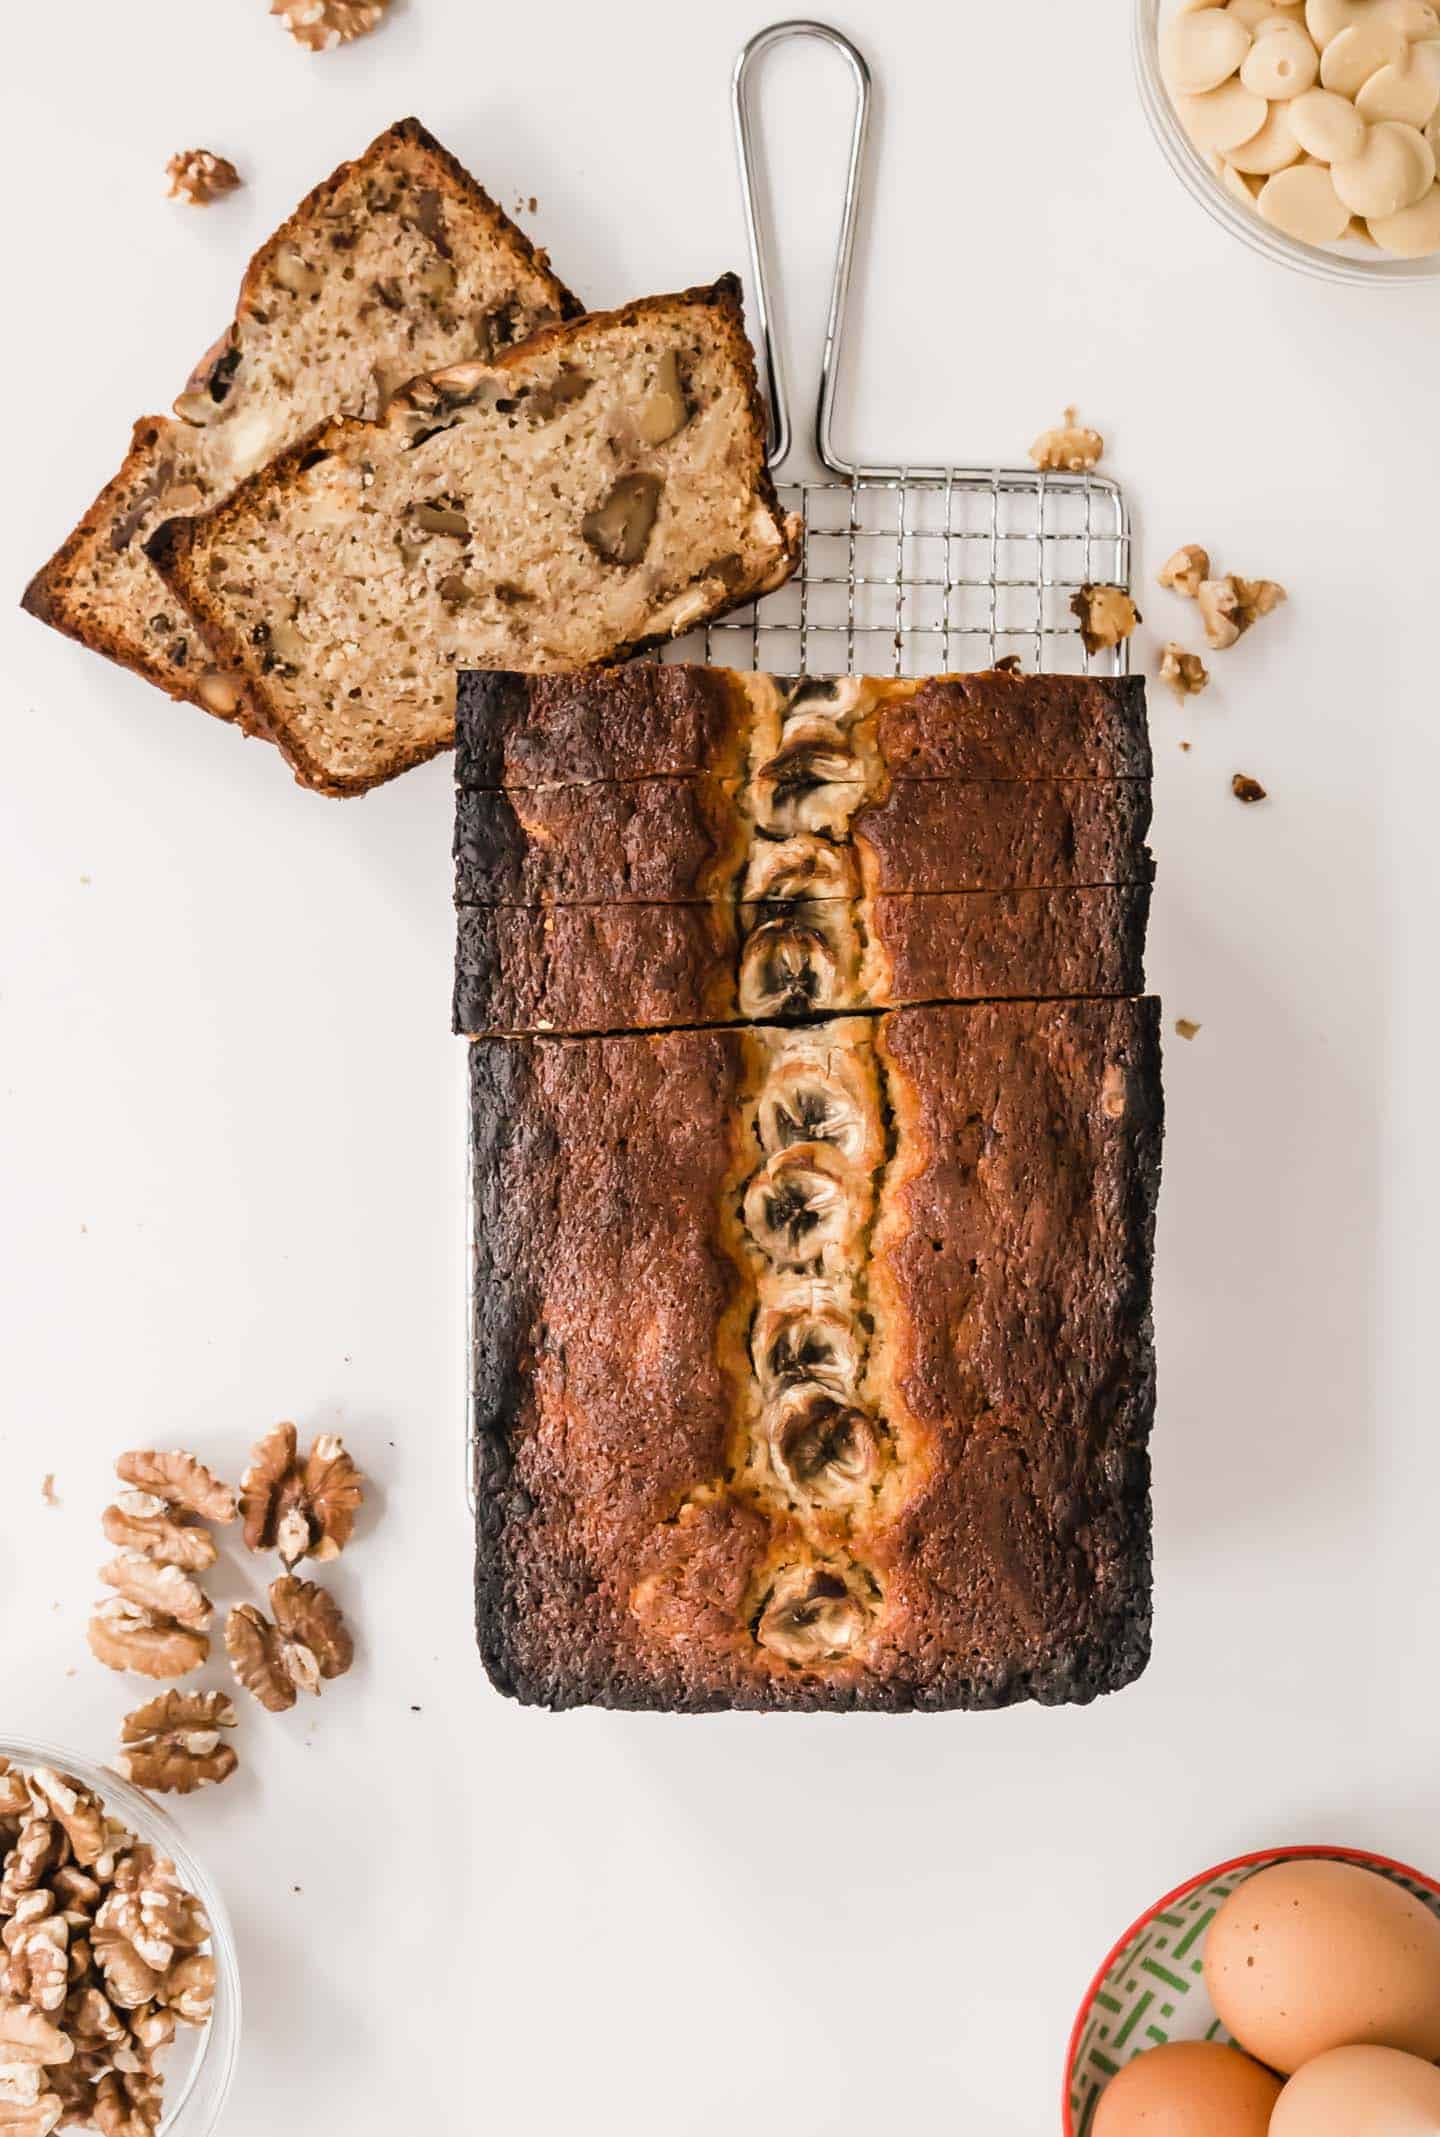 Traditional Banana Bread recipe, but enhanced with sweet white chocolate chips and crunchy walnuts. Moist, easy and quick to put together.